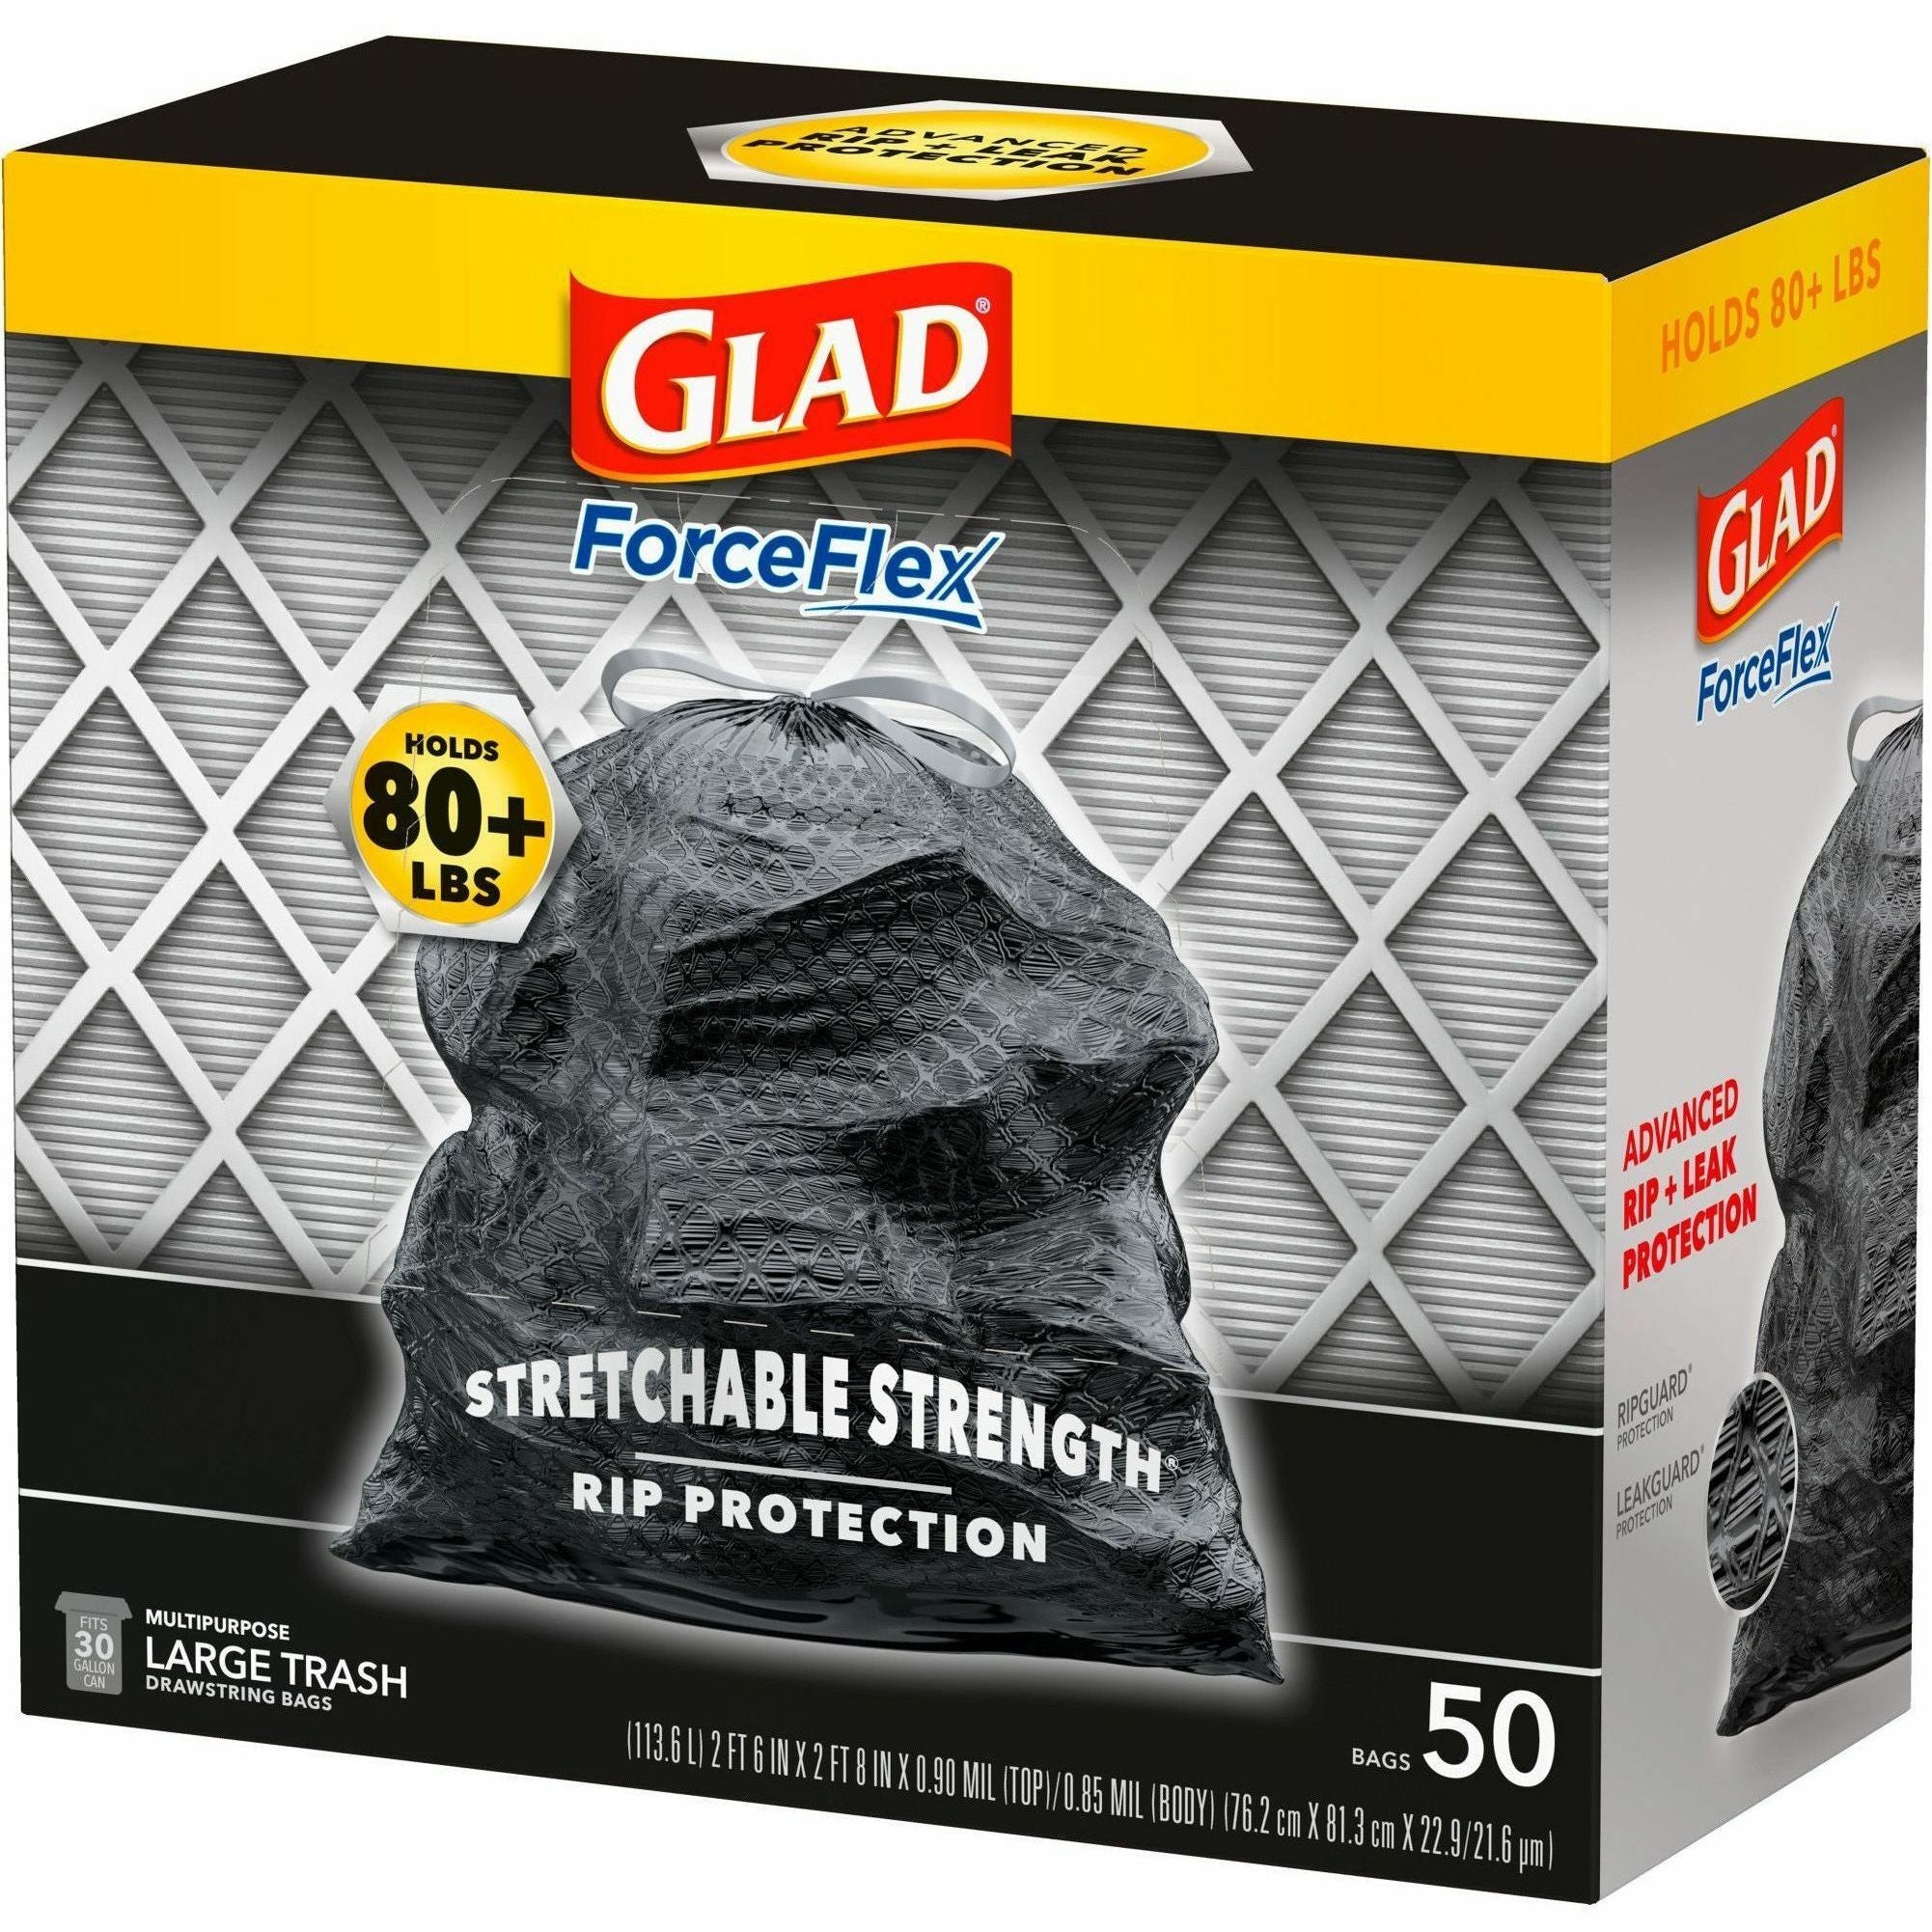 Glad ForceFlexPlus Drawstring Large Trash Bags - Large Size - 30 gal Capacity - 30" Width x 32.01" Length - 0.90 mil (23 Micron) Thickness - Drawstring Closure - Black - 1Box - 50 Per Box - Garbage, Indoor, Outdoor, Home, Office, Restaurant, Commerci - 3